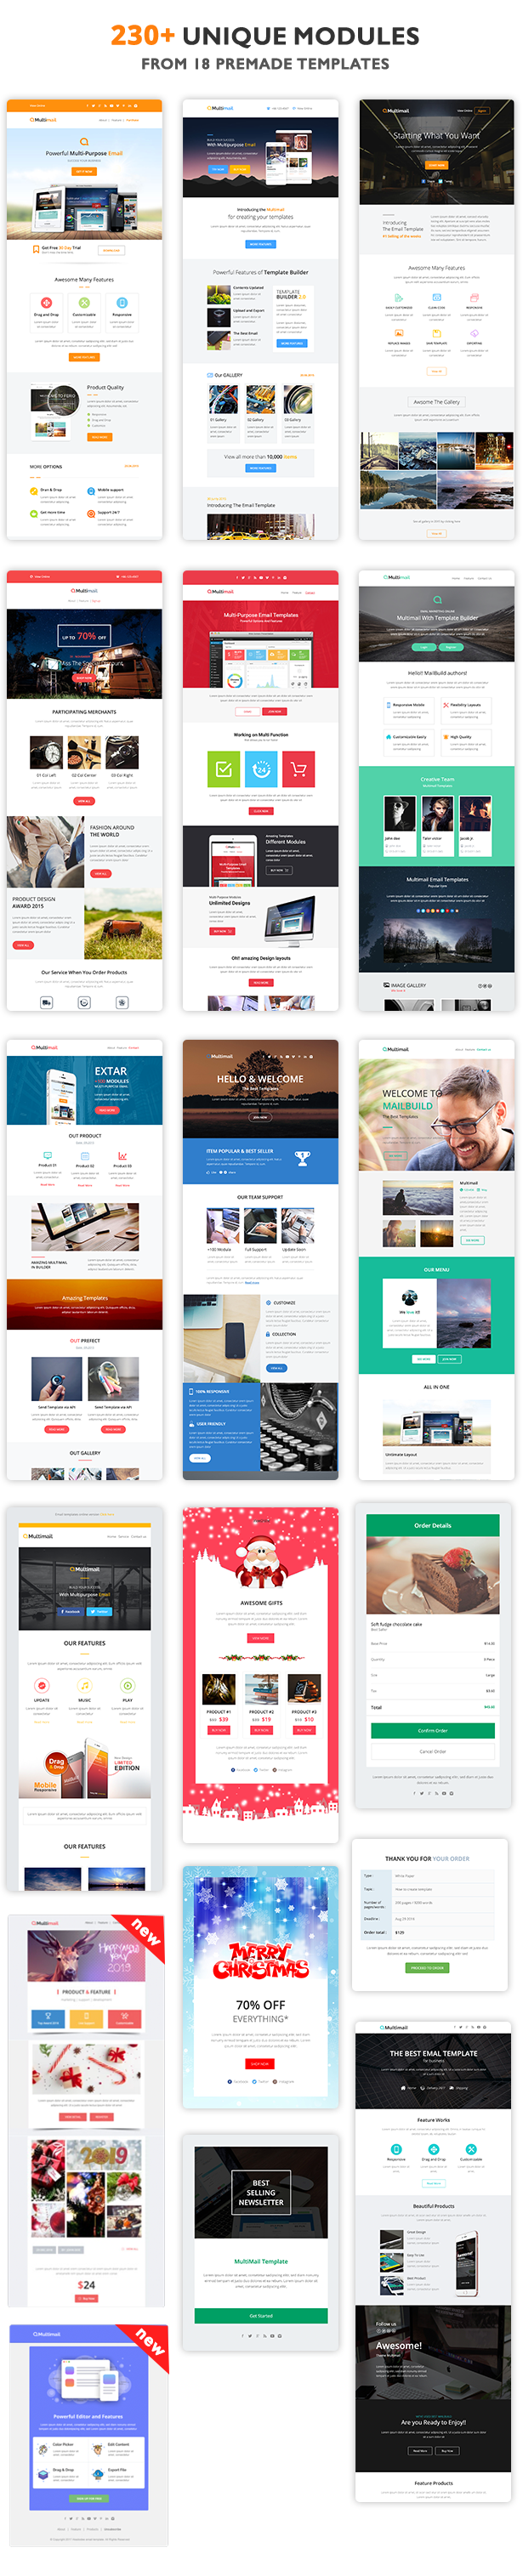 Multimail | Responsive Mailchimp Email Template Set - 4